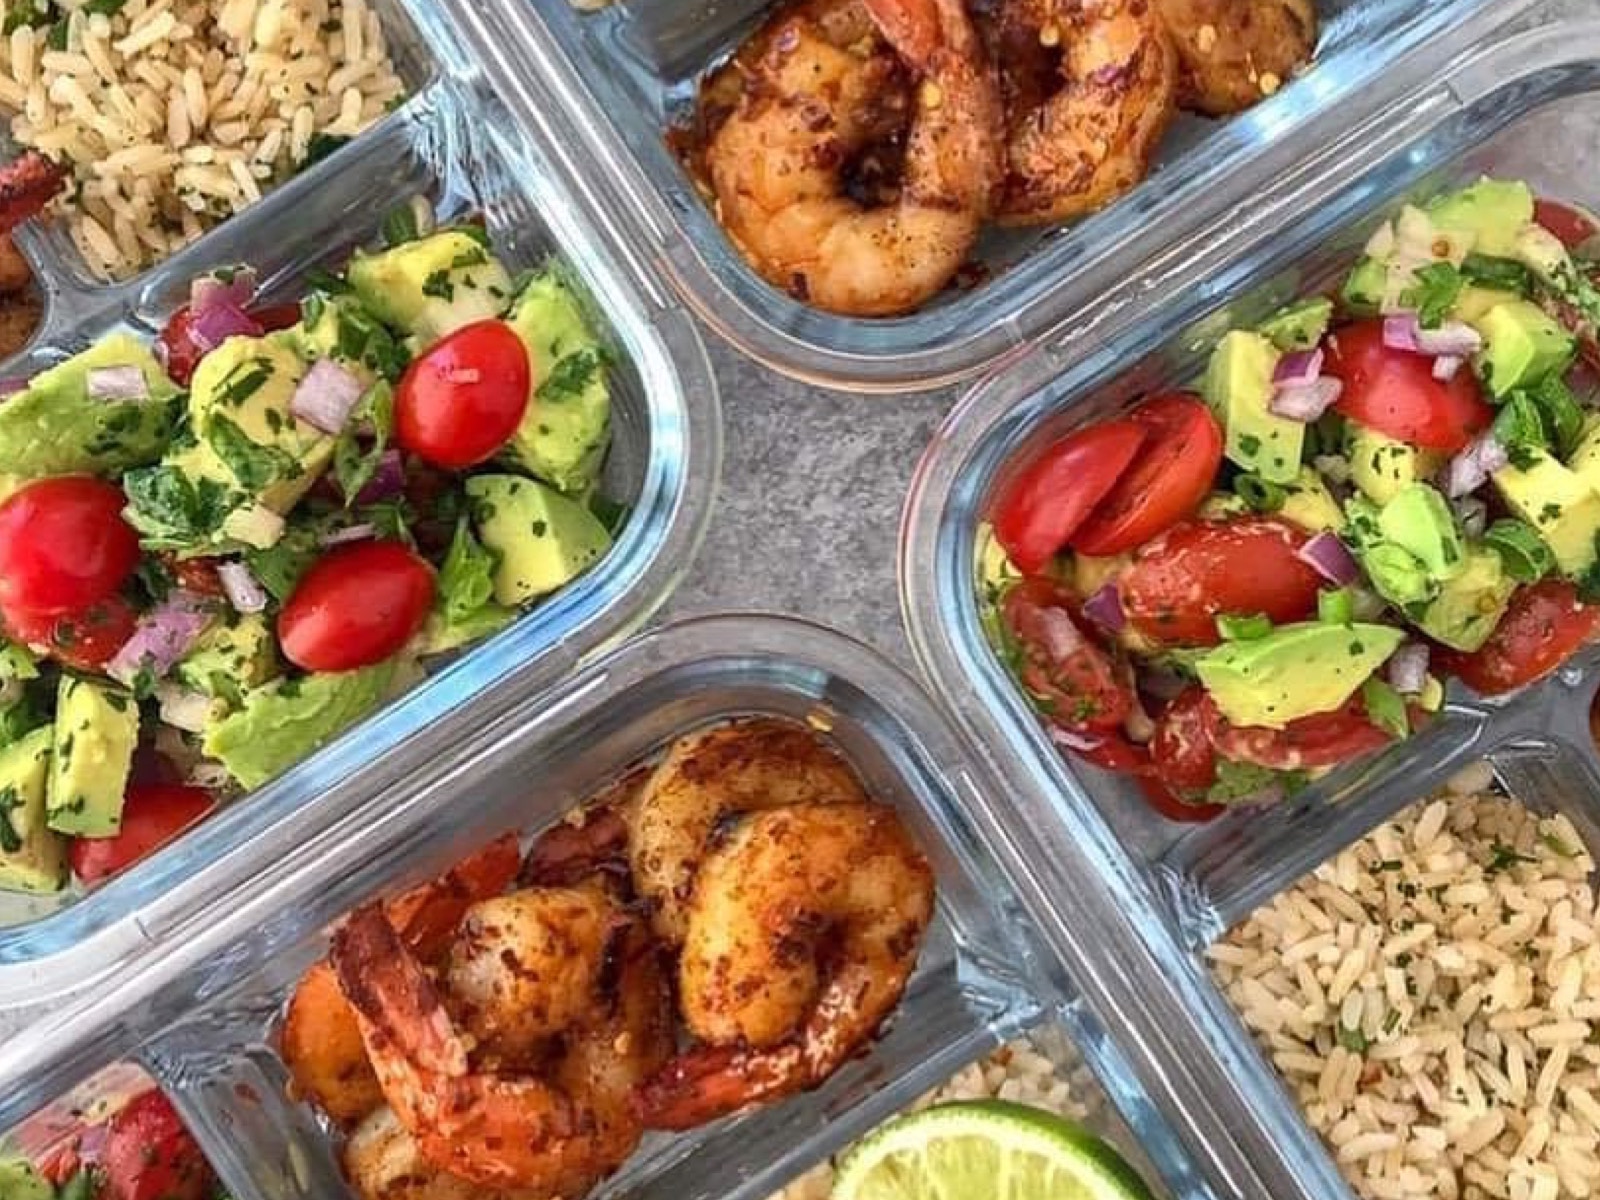 Getting Started with Meal Prep - Six Pack Workouts